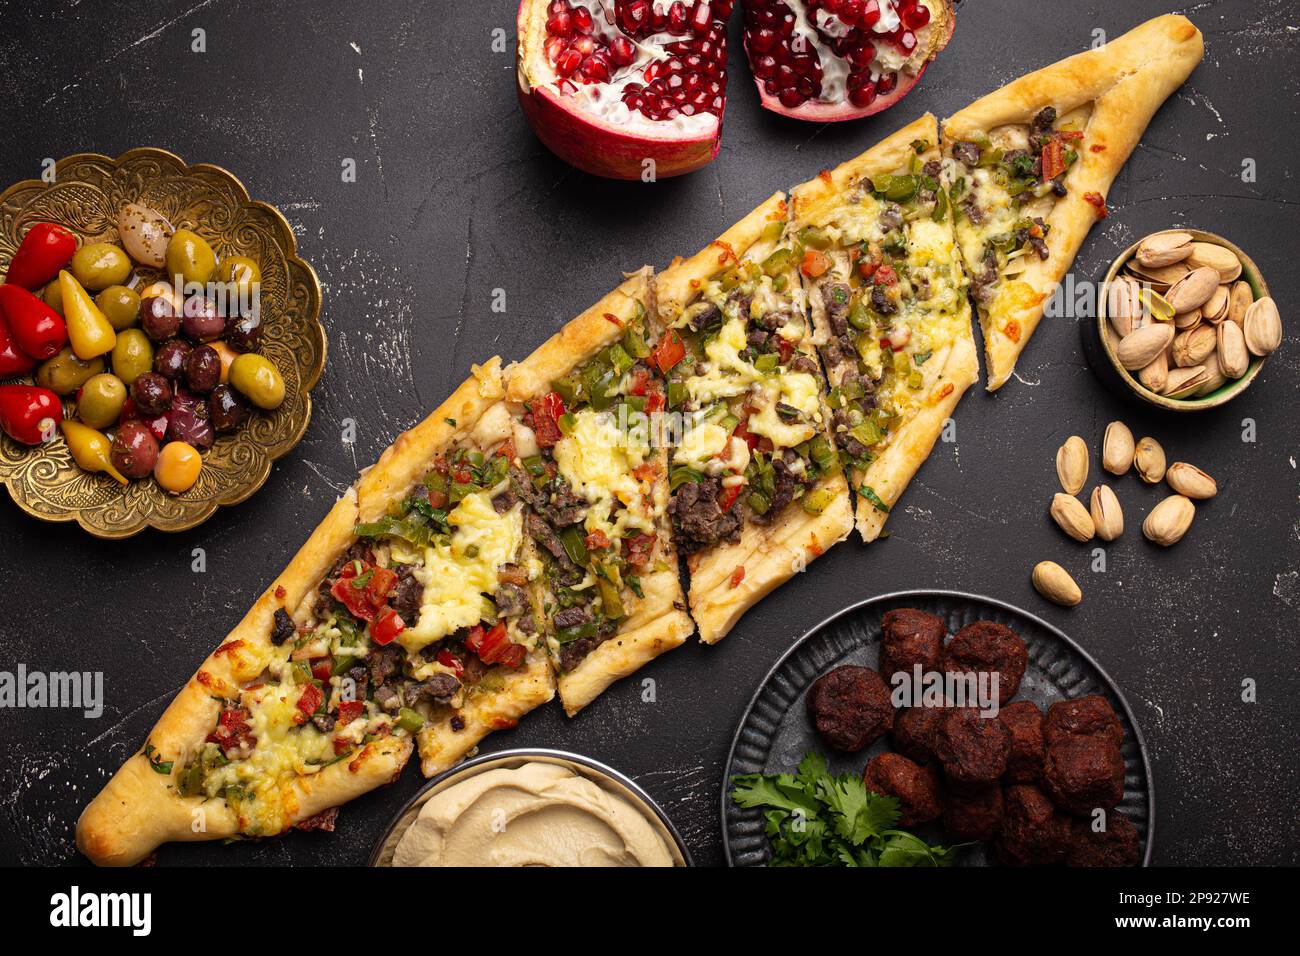 Traditional Turkish pizza pide freshly baked with ground beef and vegetables served on black stone background with assorted Middle Eastern meze from Stock Photo